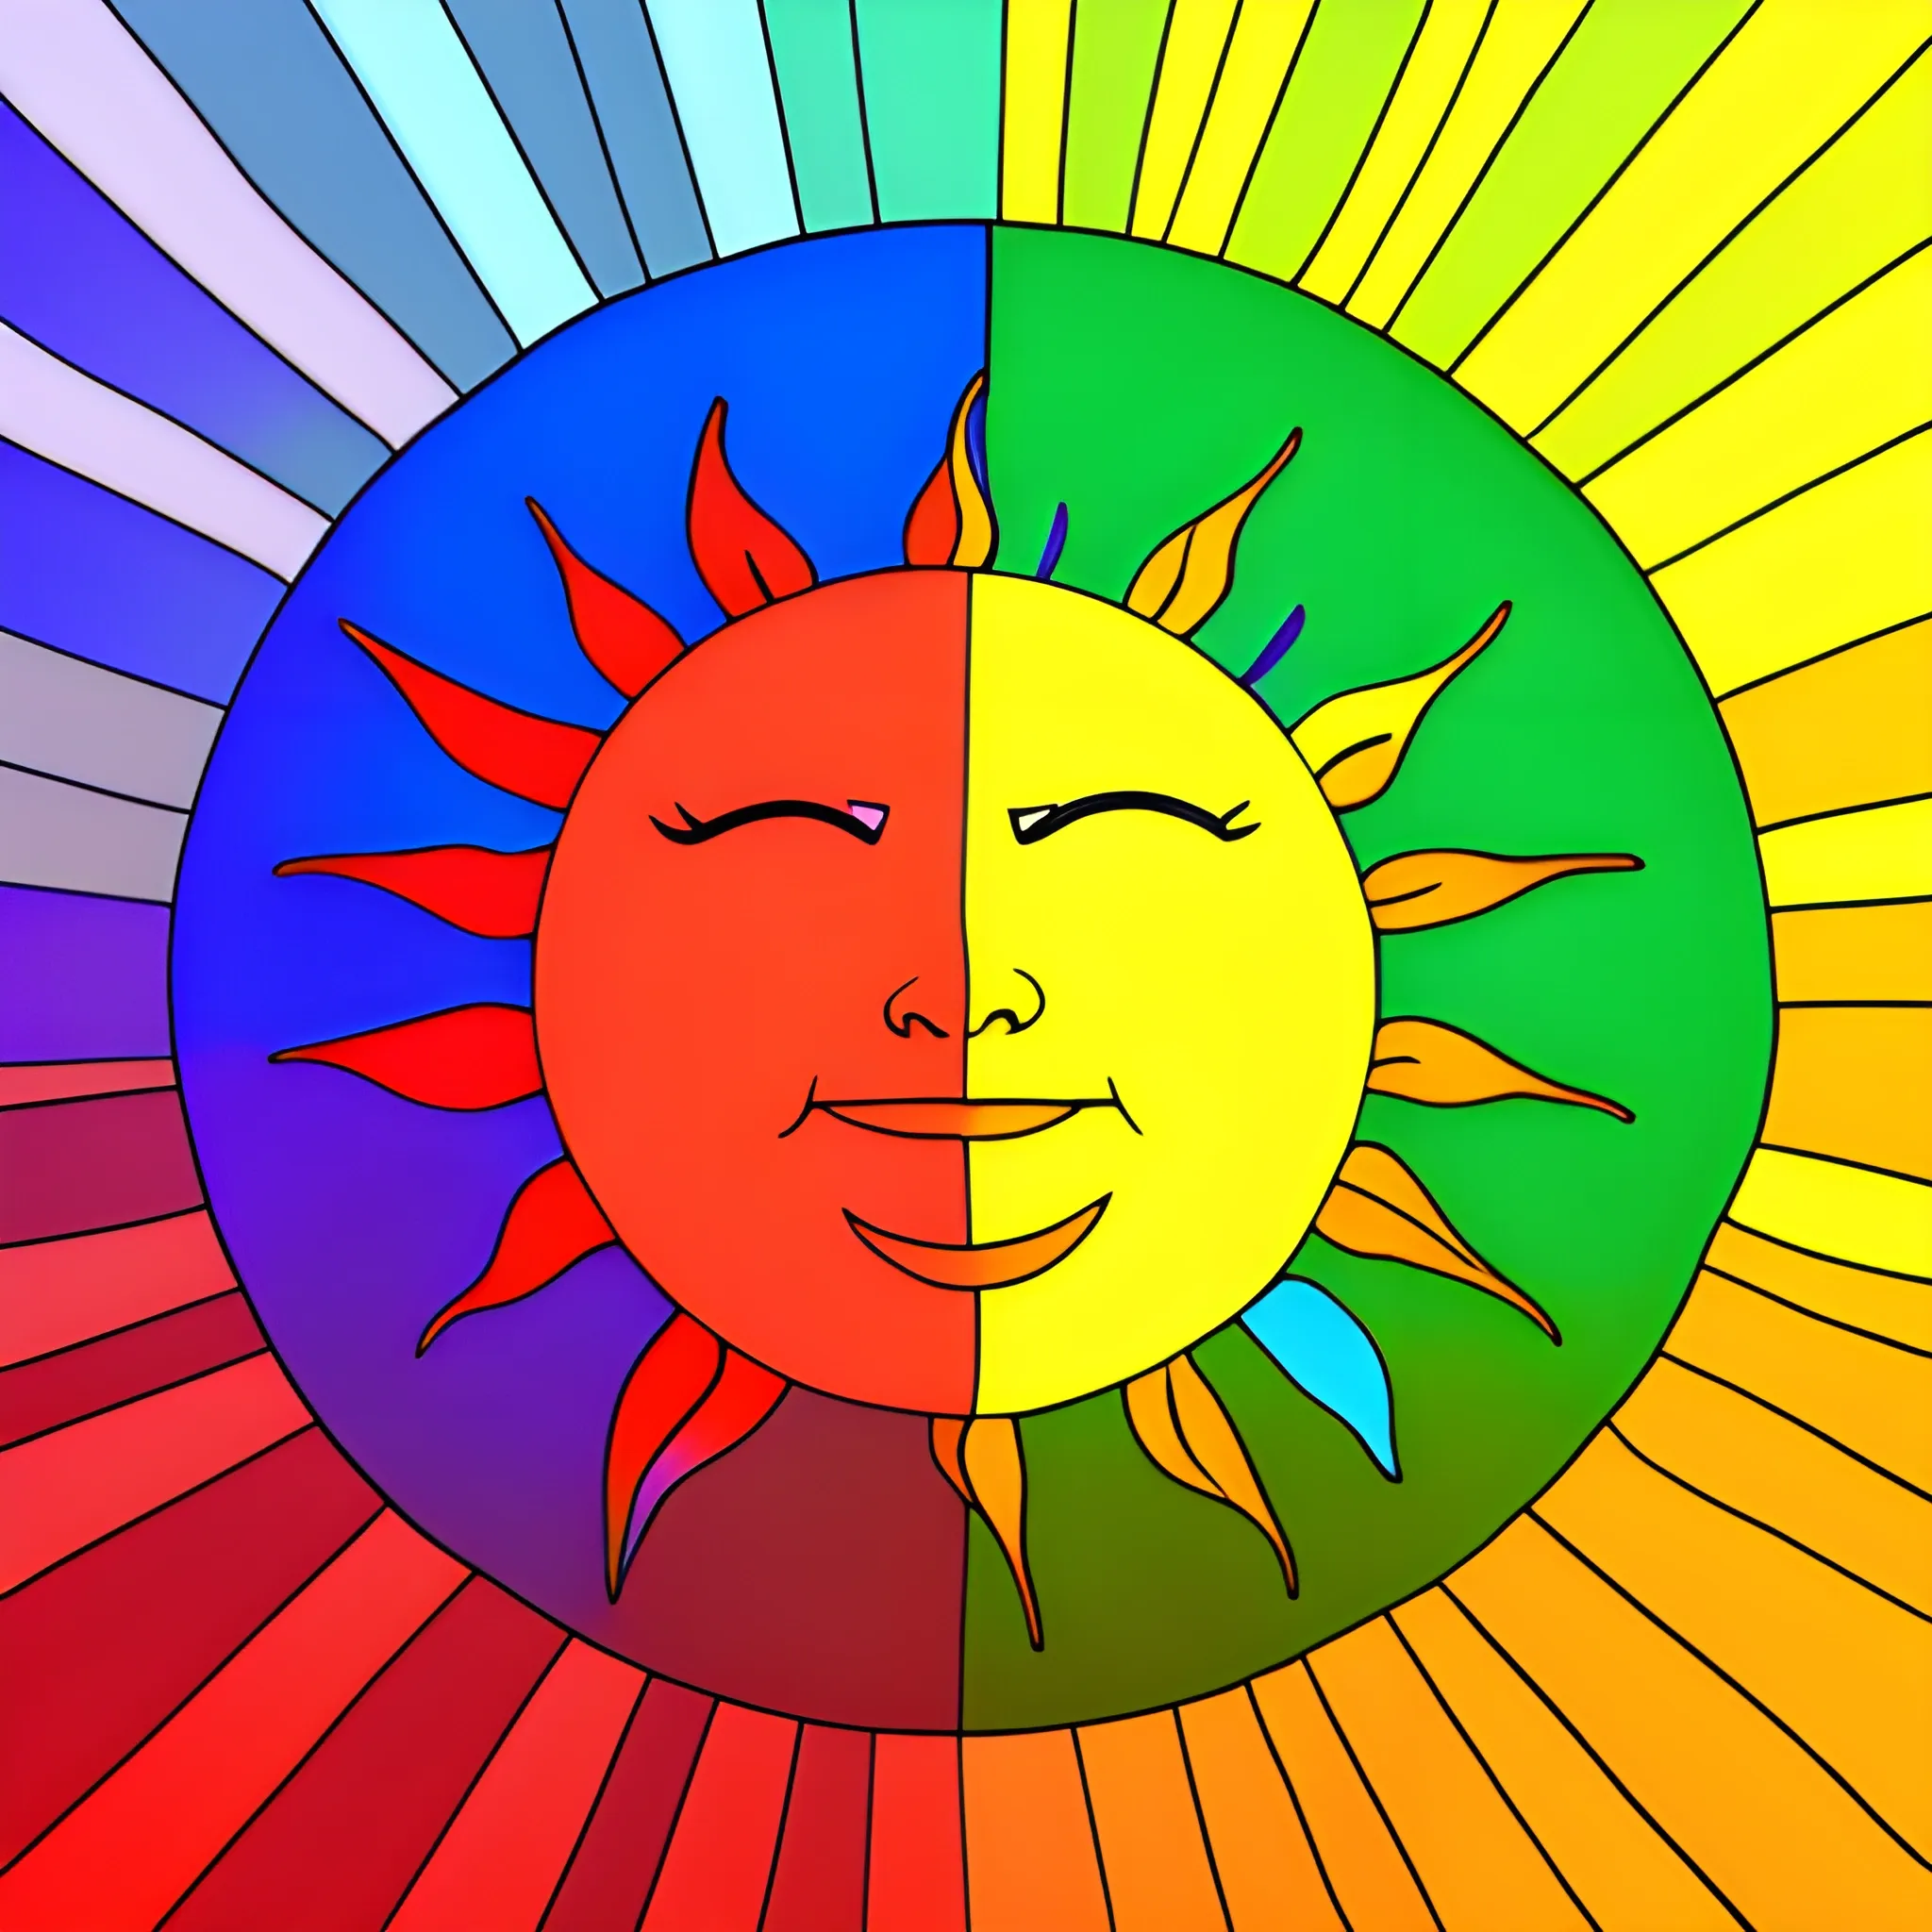  A radiant sun with rainbow colors, representing hope and cultural diversity., Cartoon